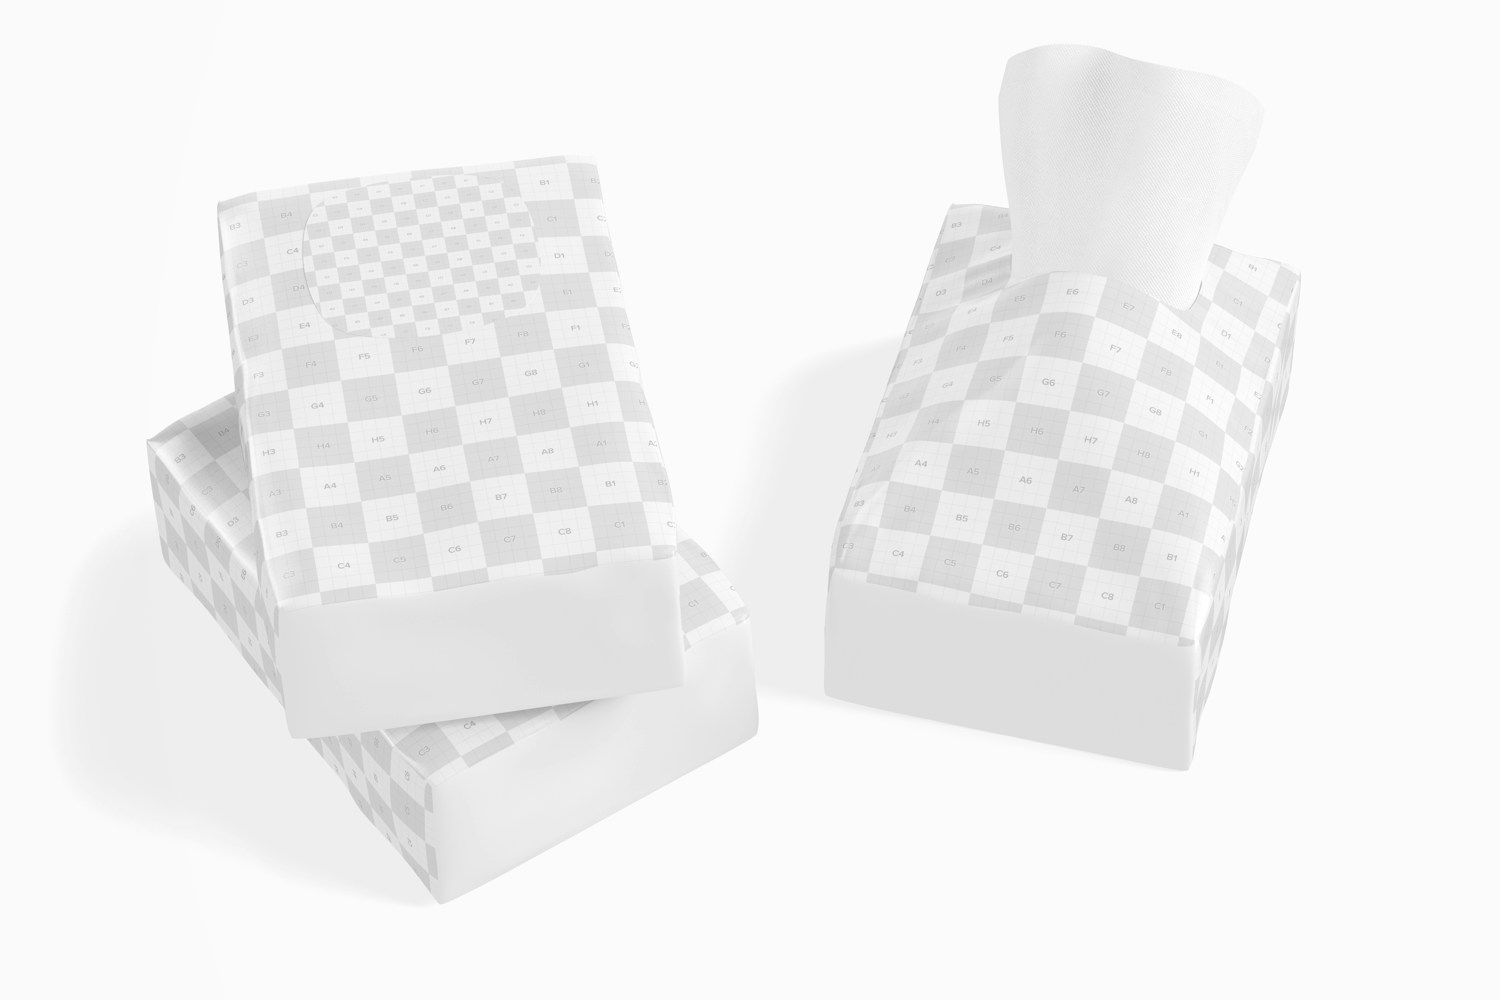 Small Tissue Packets Mockup, Stacked